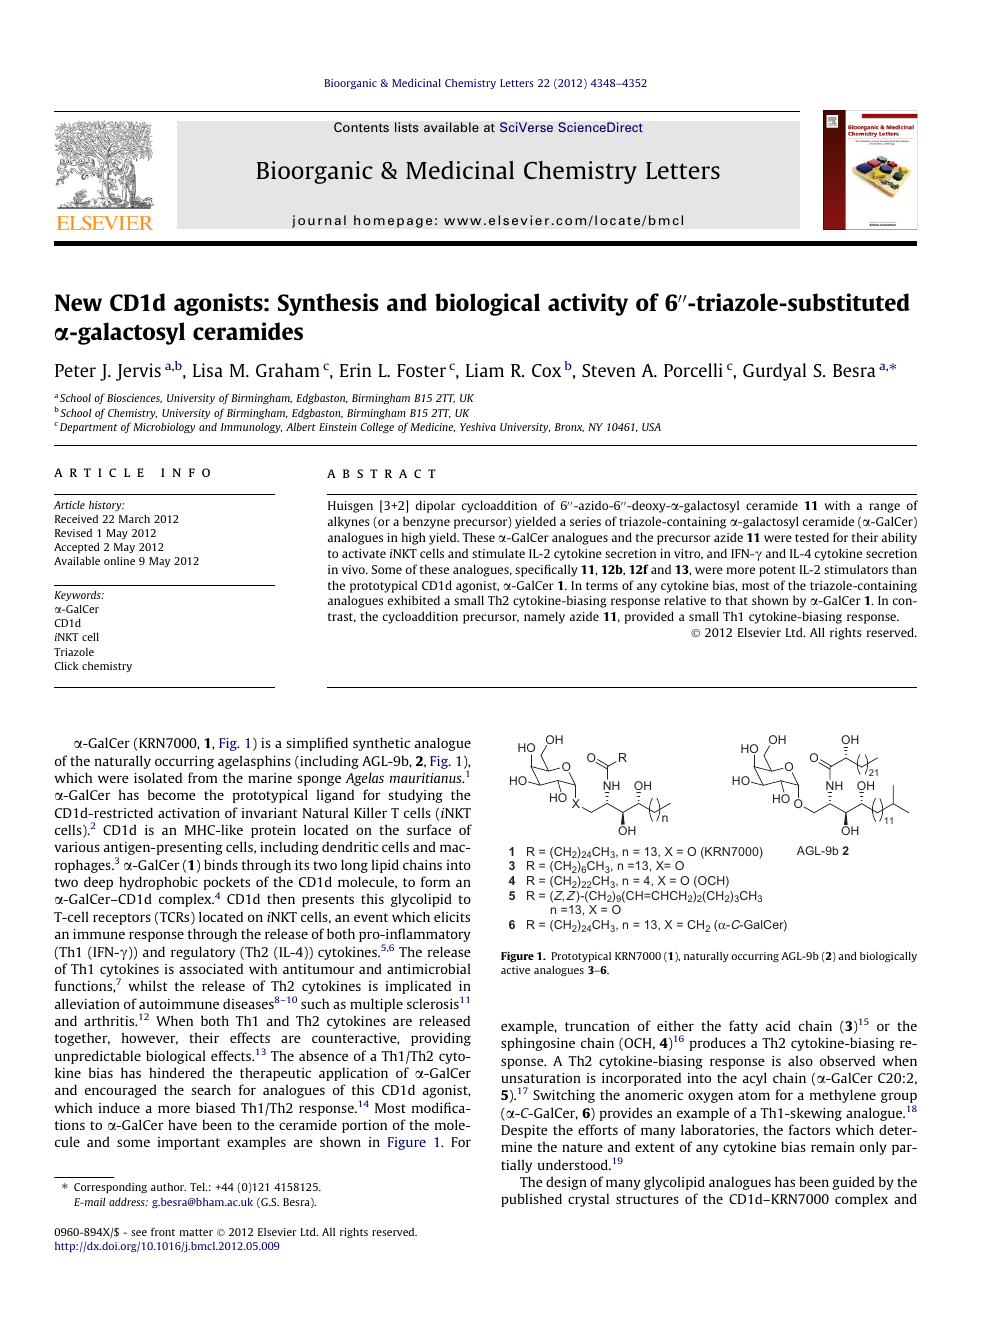 New Cd1d Agonists Synthesis And Biological Activity Of 6 Triazole Substituted A Galactosyl Ceramides Topic Of Research Paper In Chemical Sciences Download Scholarly Article Pdf And Read For Free On Cyberleninka Open Science Hub